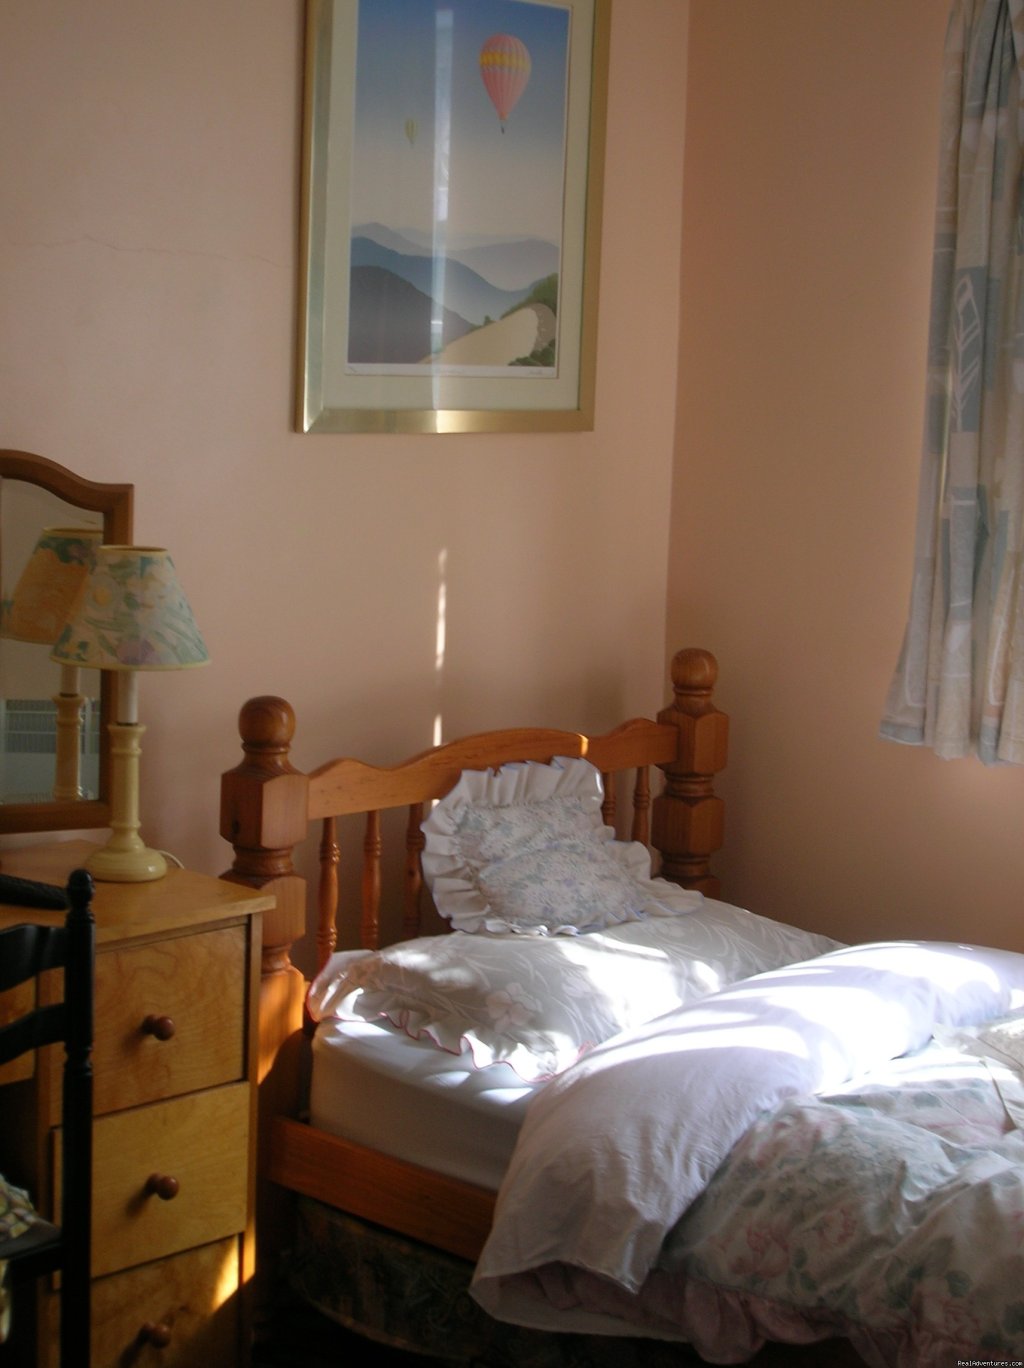 Single room with private shower and wash | Beautiful Guest house / b&b near Gatwick airport | Image #3/7 | 